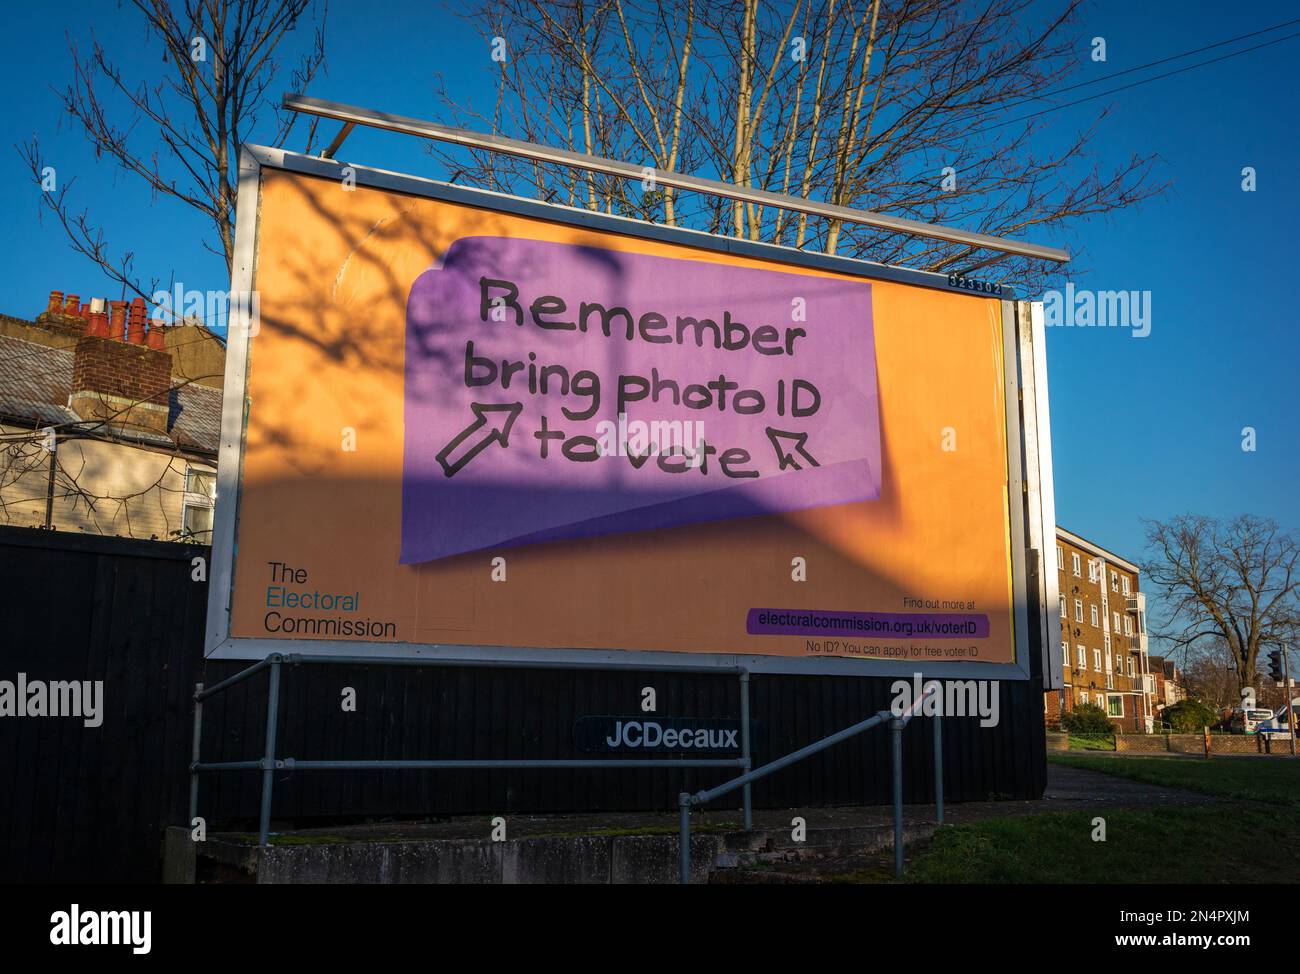 Remember bring your photo ID - the Electoral Commission advert on a billboard in England, UK Stock Photo